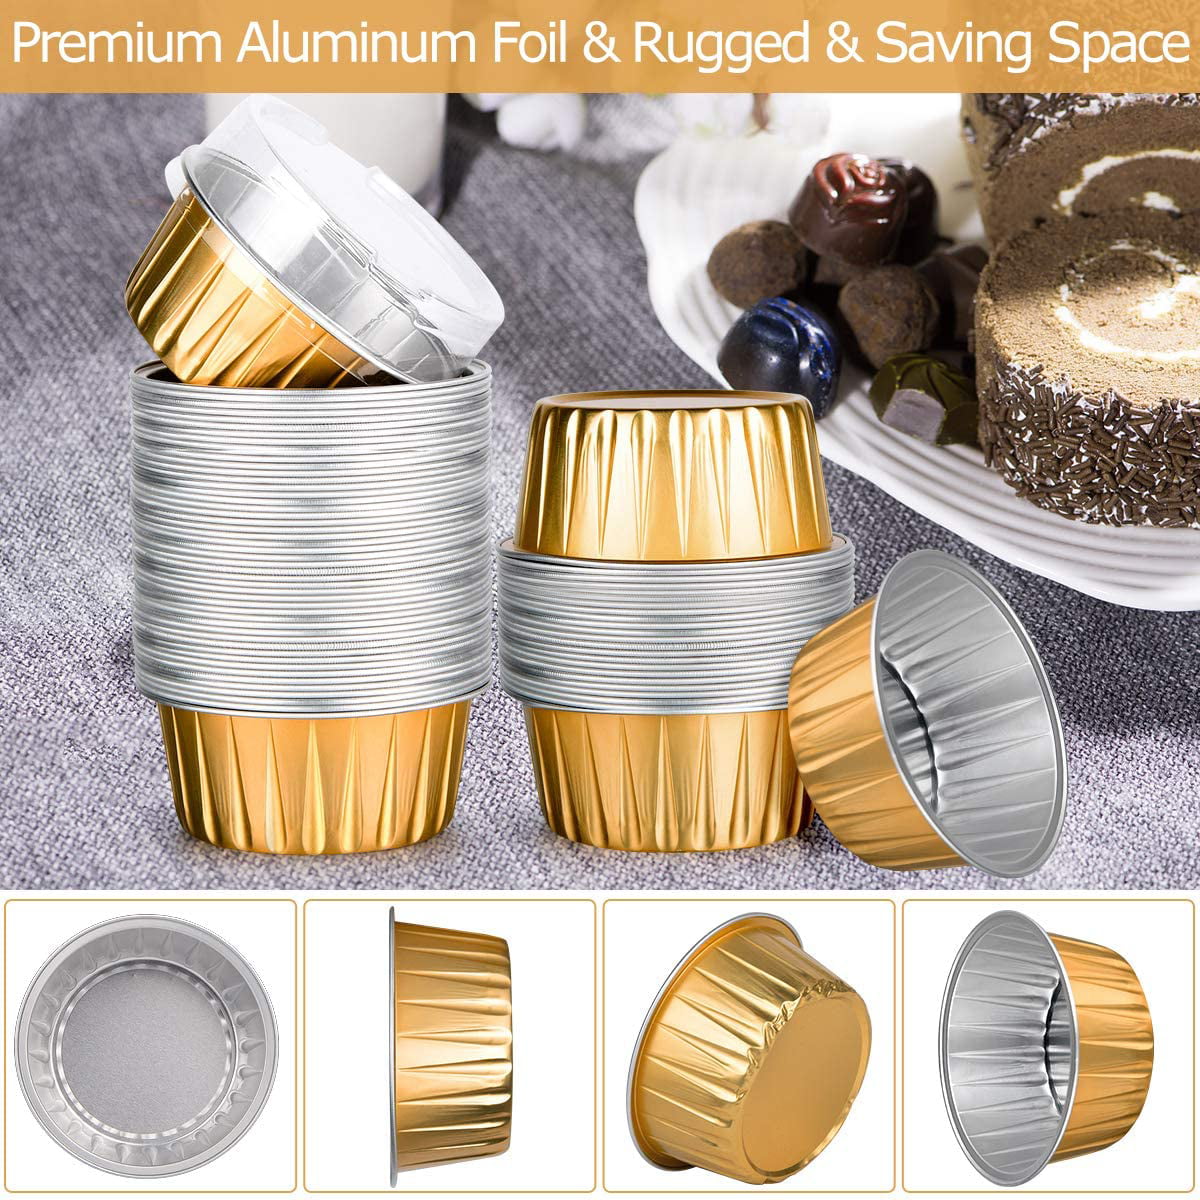 Foil Baking Cups with Lids,NOGIS 50pcs 5oz Aluminum Foil Cupcake Cups Liners,Mini  Cake Pans,Disposable Muffin Tins,Snack Pudding Dessert Cup with  Lid,Disposable Ramekins Containers Flans 